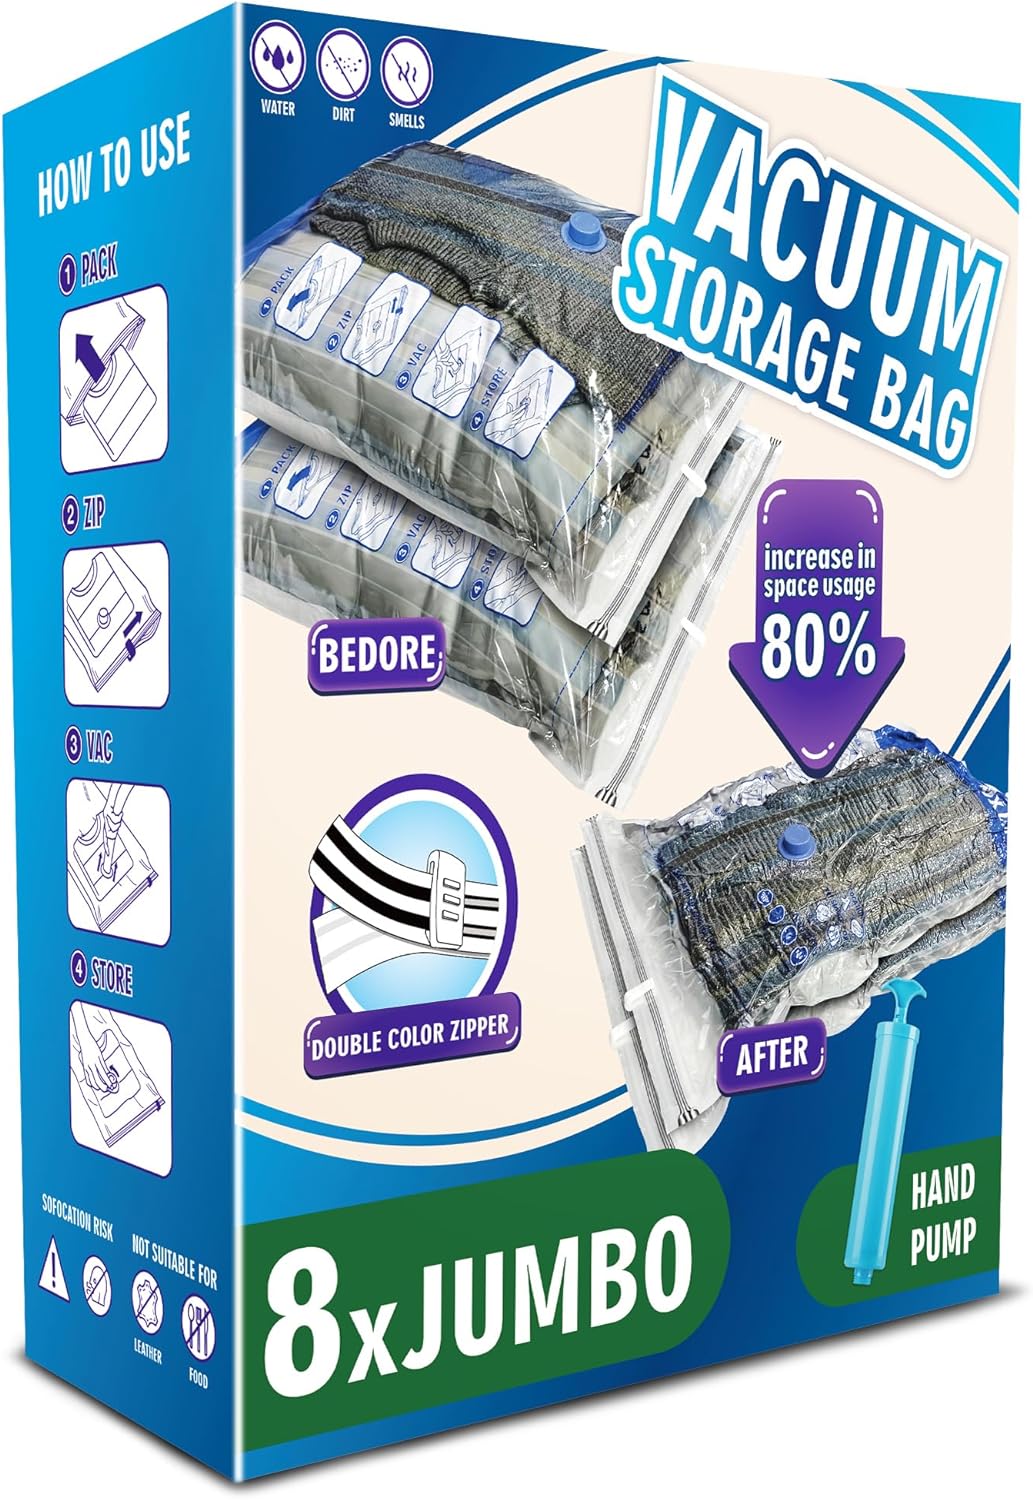 Jumbo Vacuum Storage Bags, 8 Pack Space Saver Bags for Clothes, Comforters, Clothing and Blanket